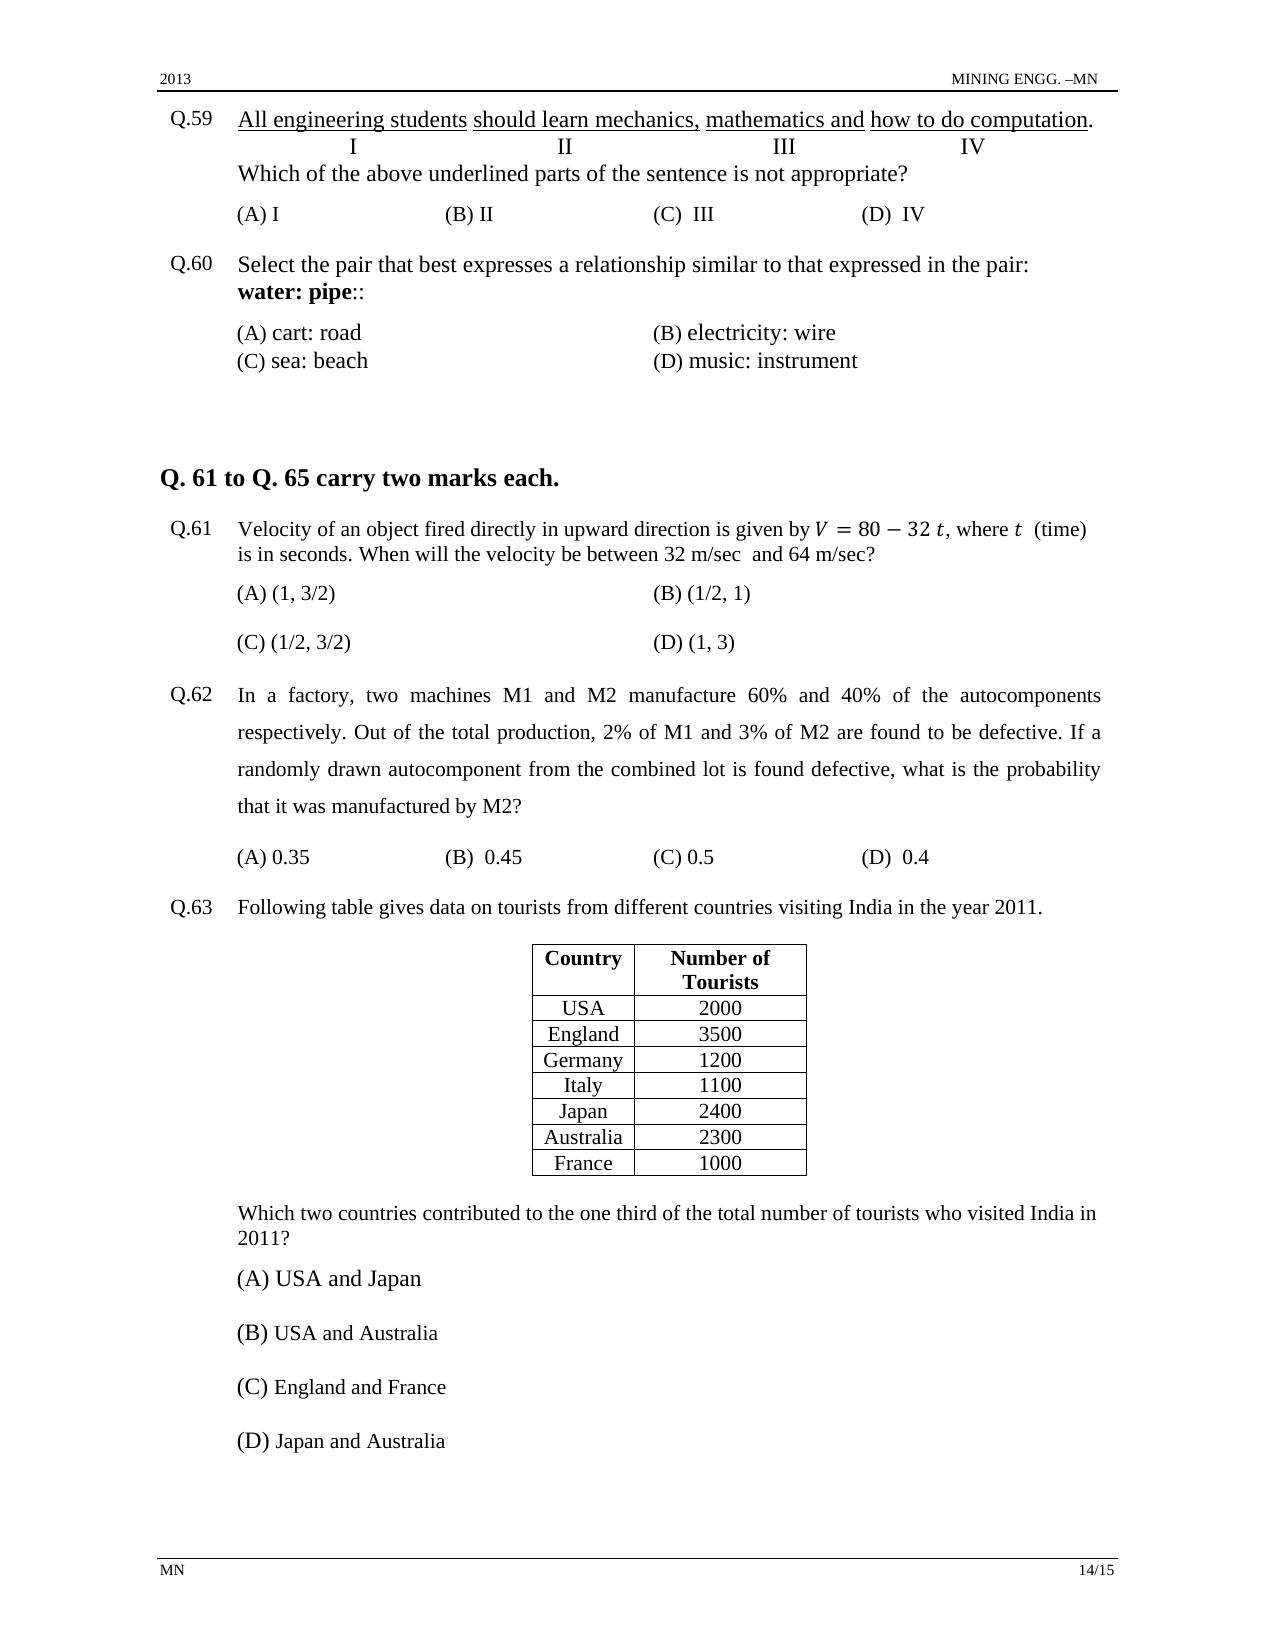 GATE 2013 Mining Engineering (MN) Question Paper with Answer Key - Page 14